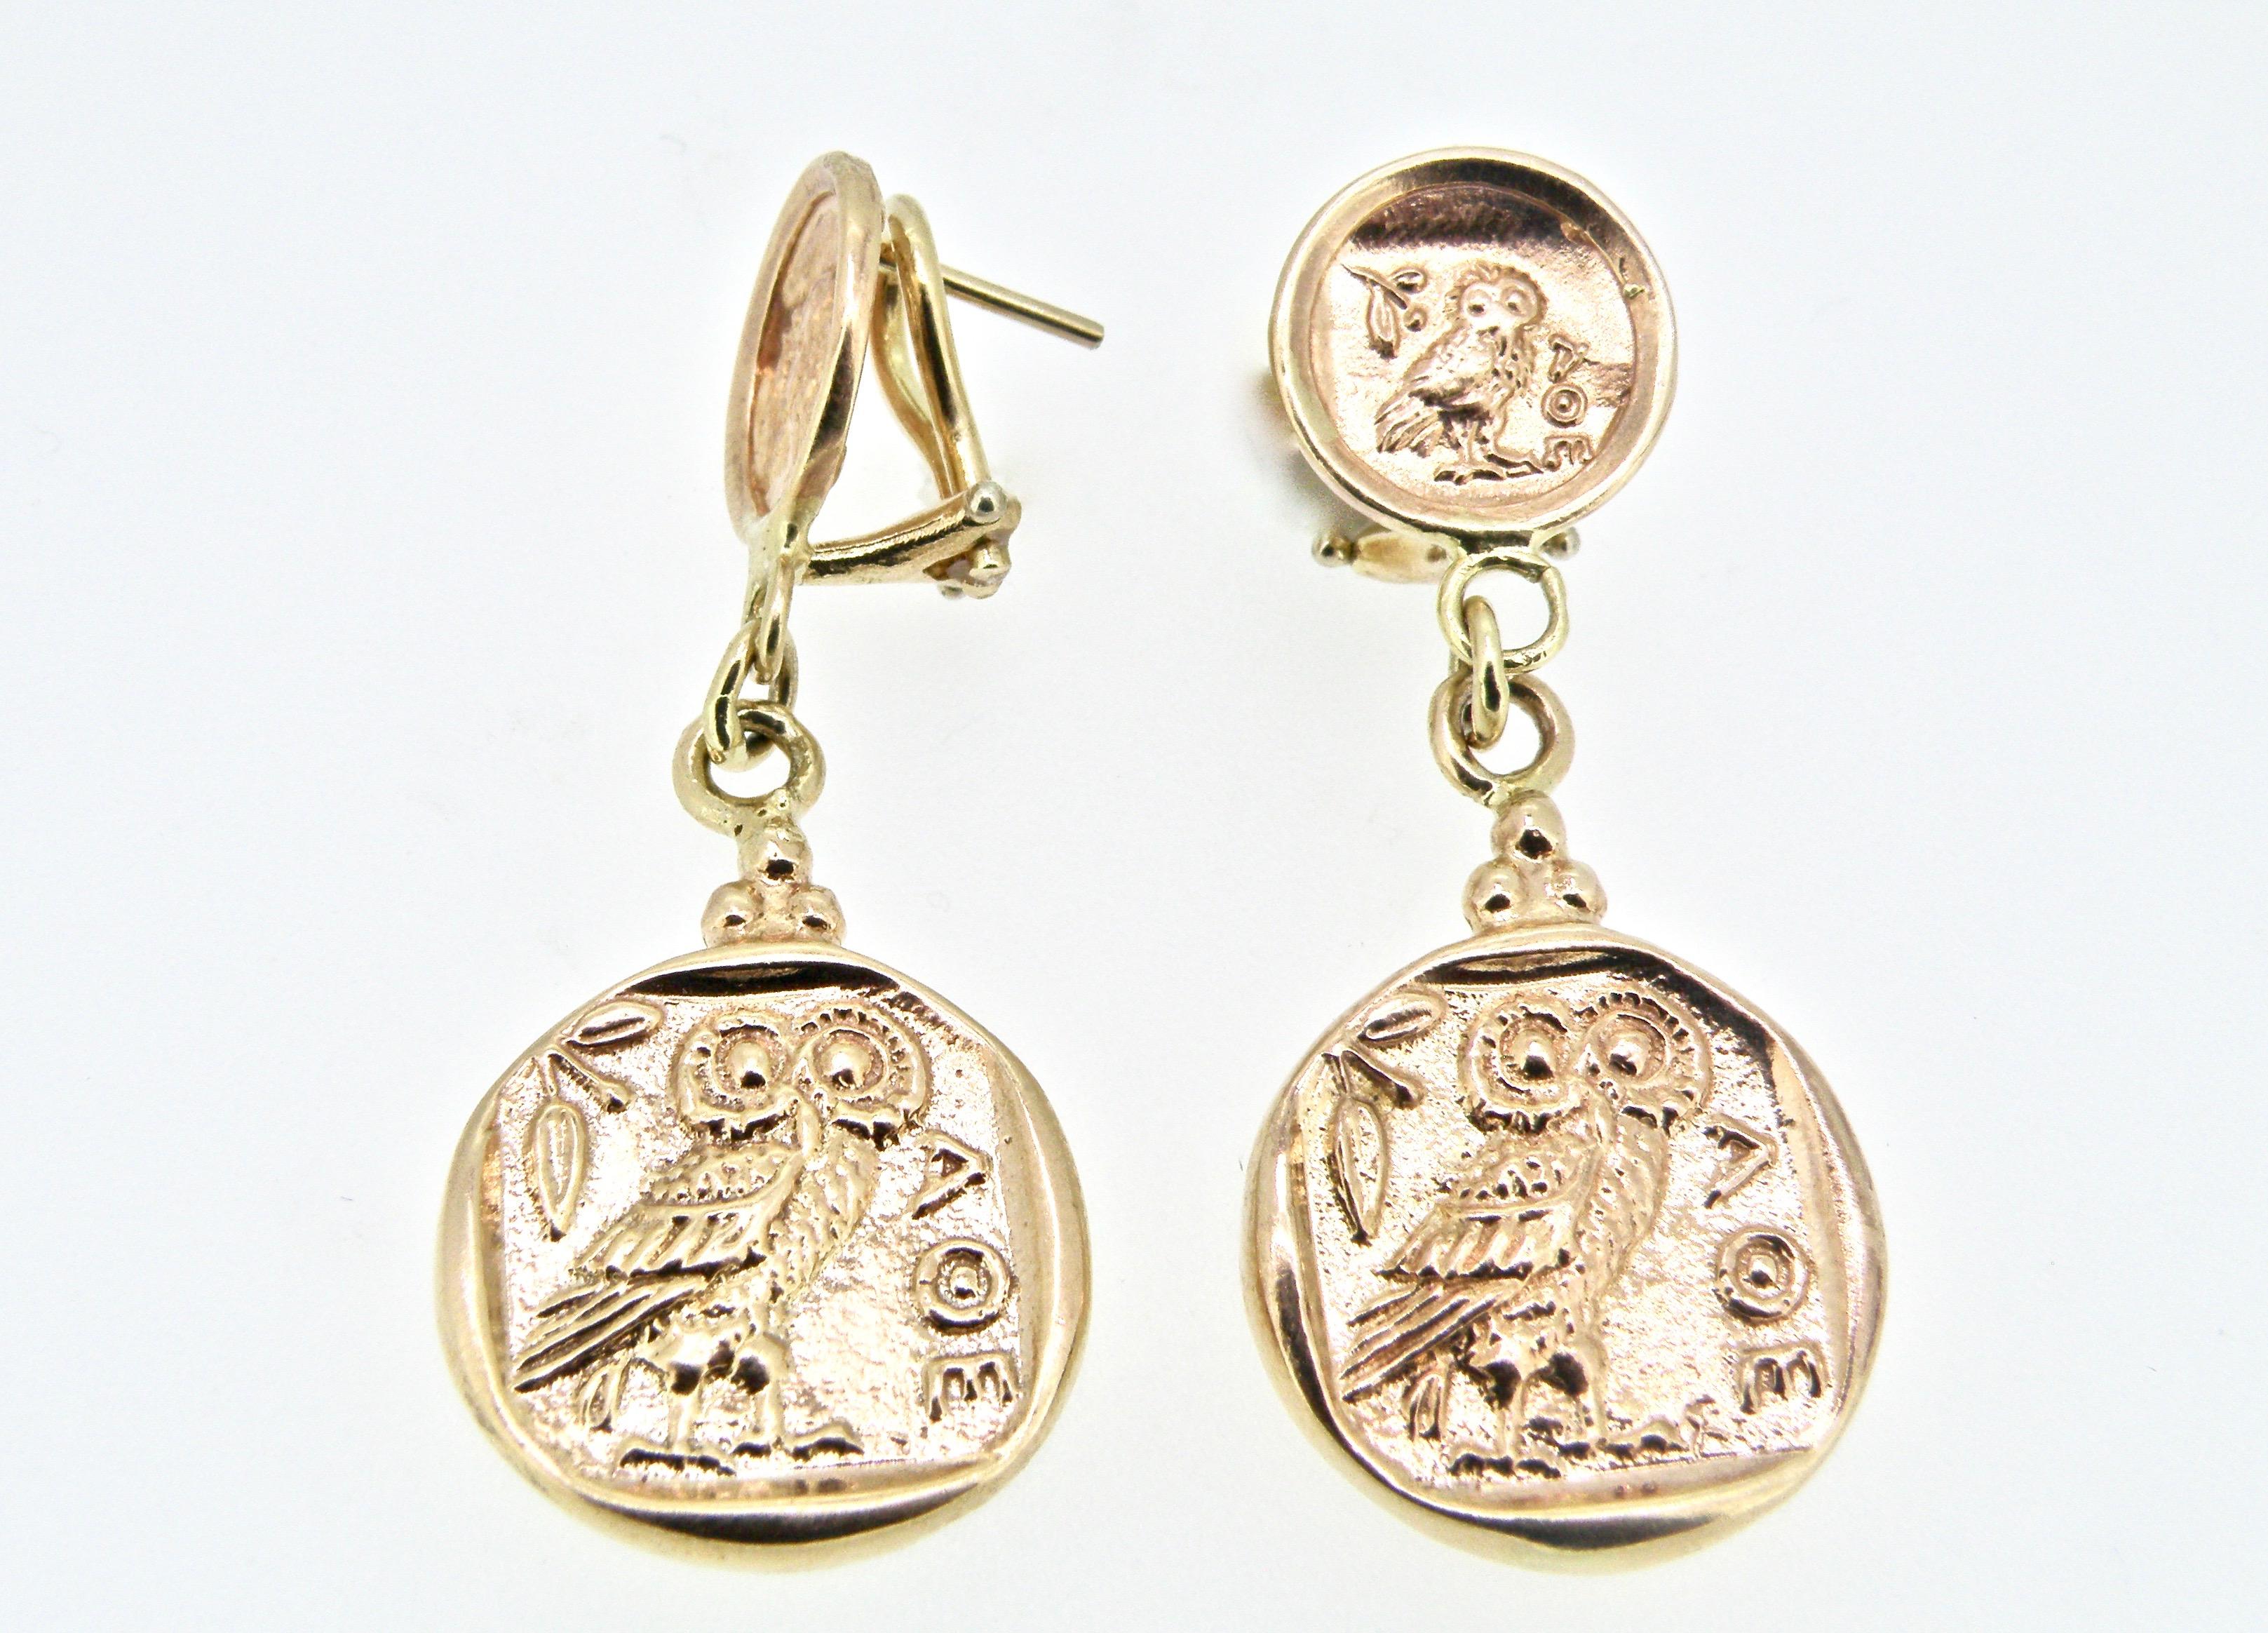 18K Owl of Athena coin earrings with clip post backs